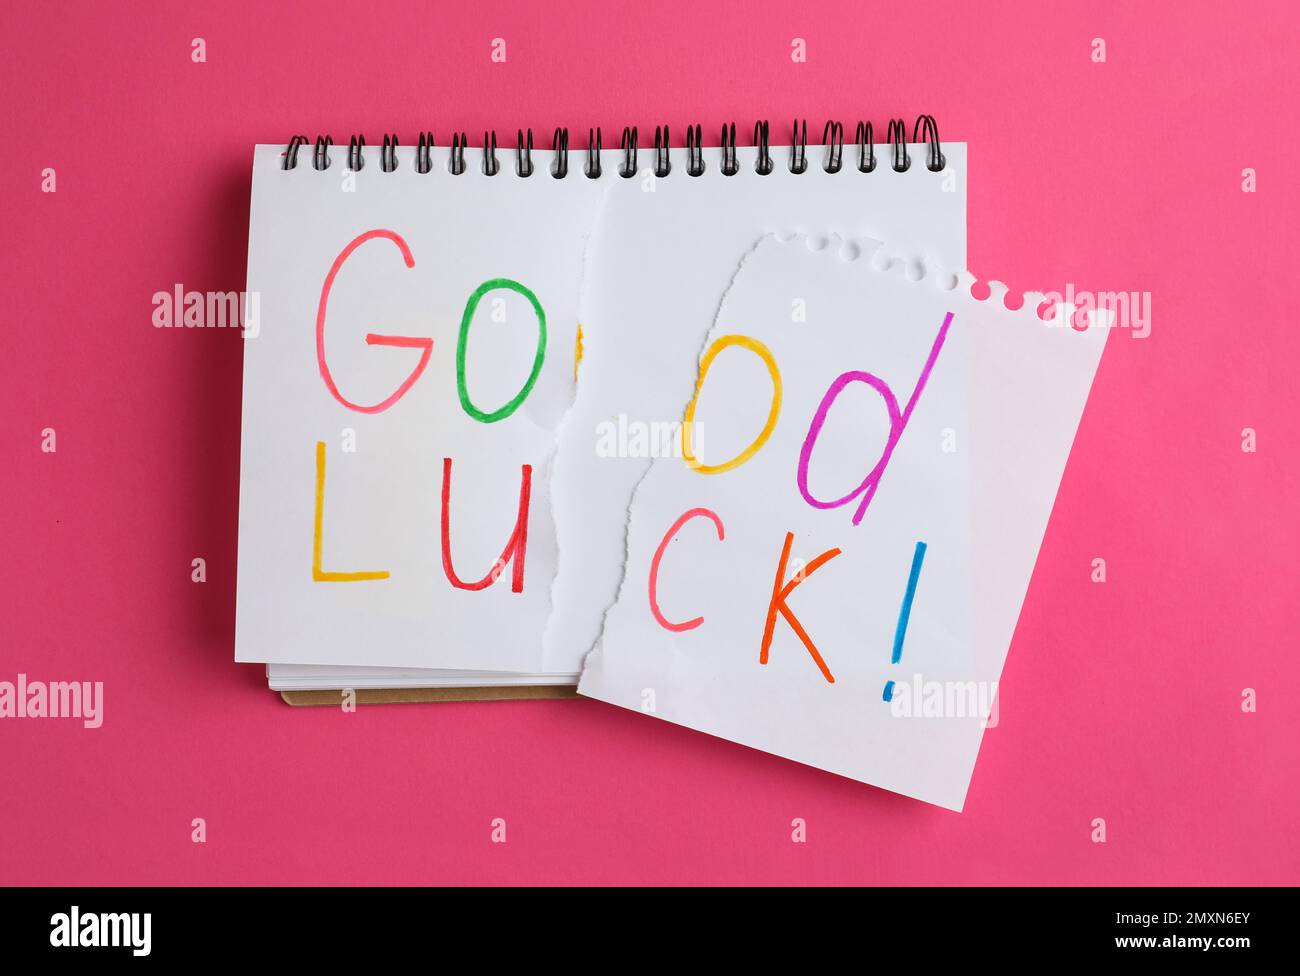 Torn phrase GOOD LUCK written in notebook on pink background, top view Stock Photo